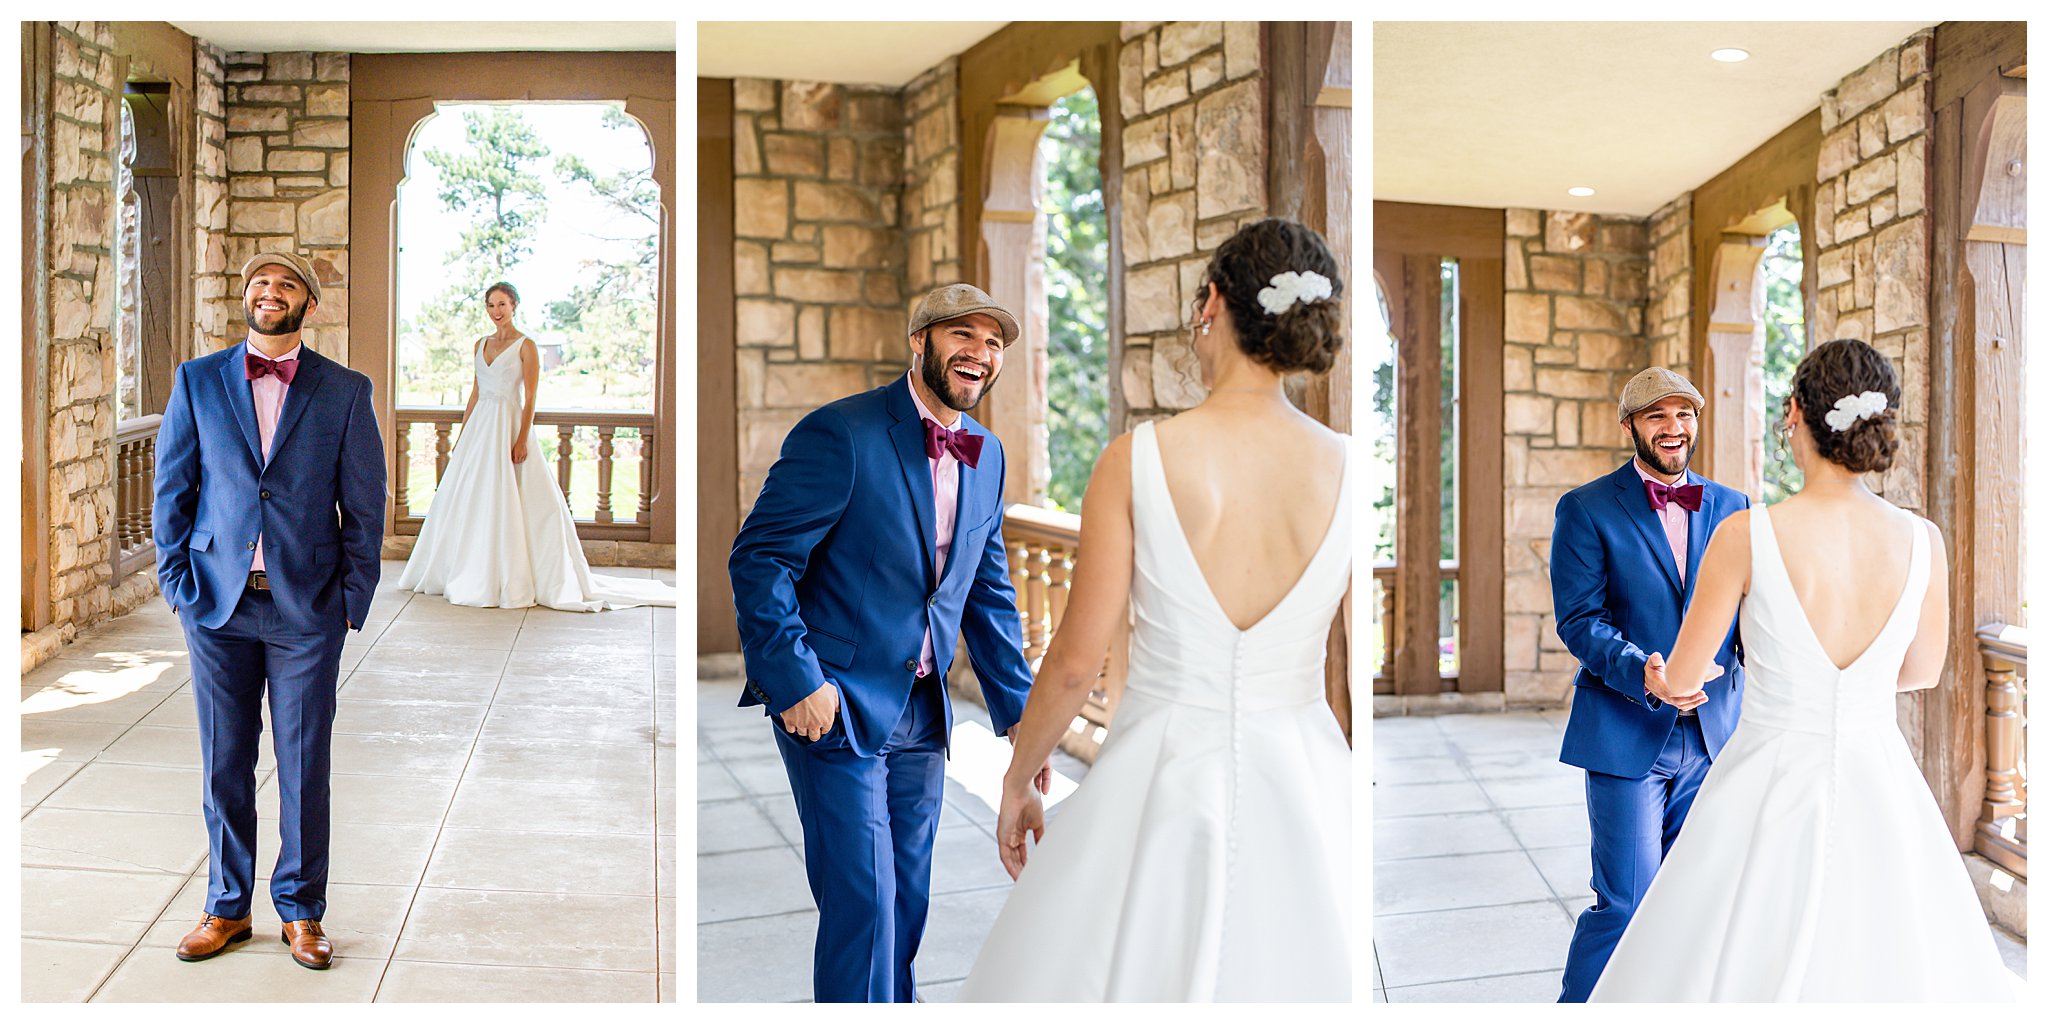 A couple has their first look as a part of their first look timeline wedding.